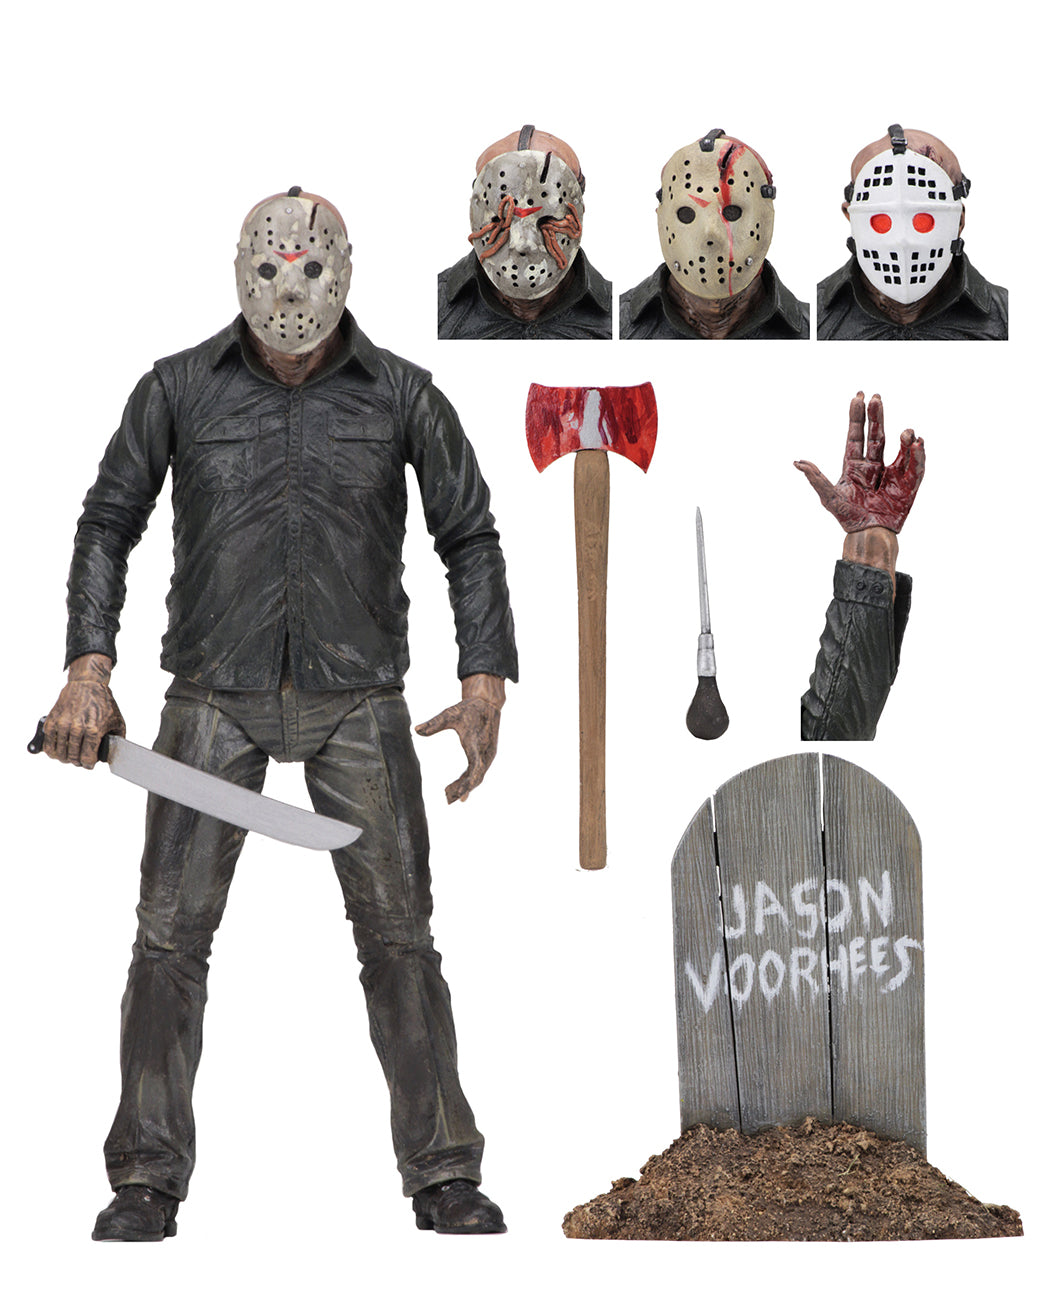 Friday the 13th 7″ Scale Action Figure Ultimate Part 5 “Dream Sequence” Jason